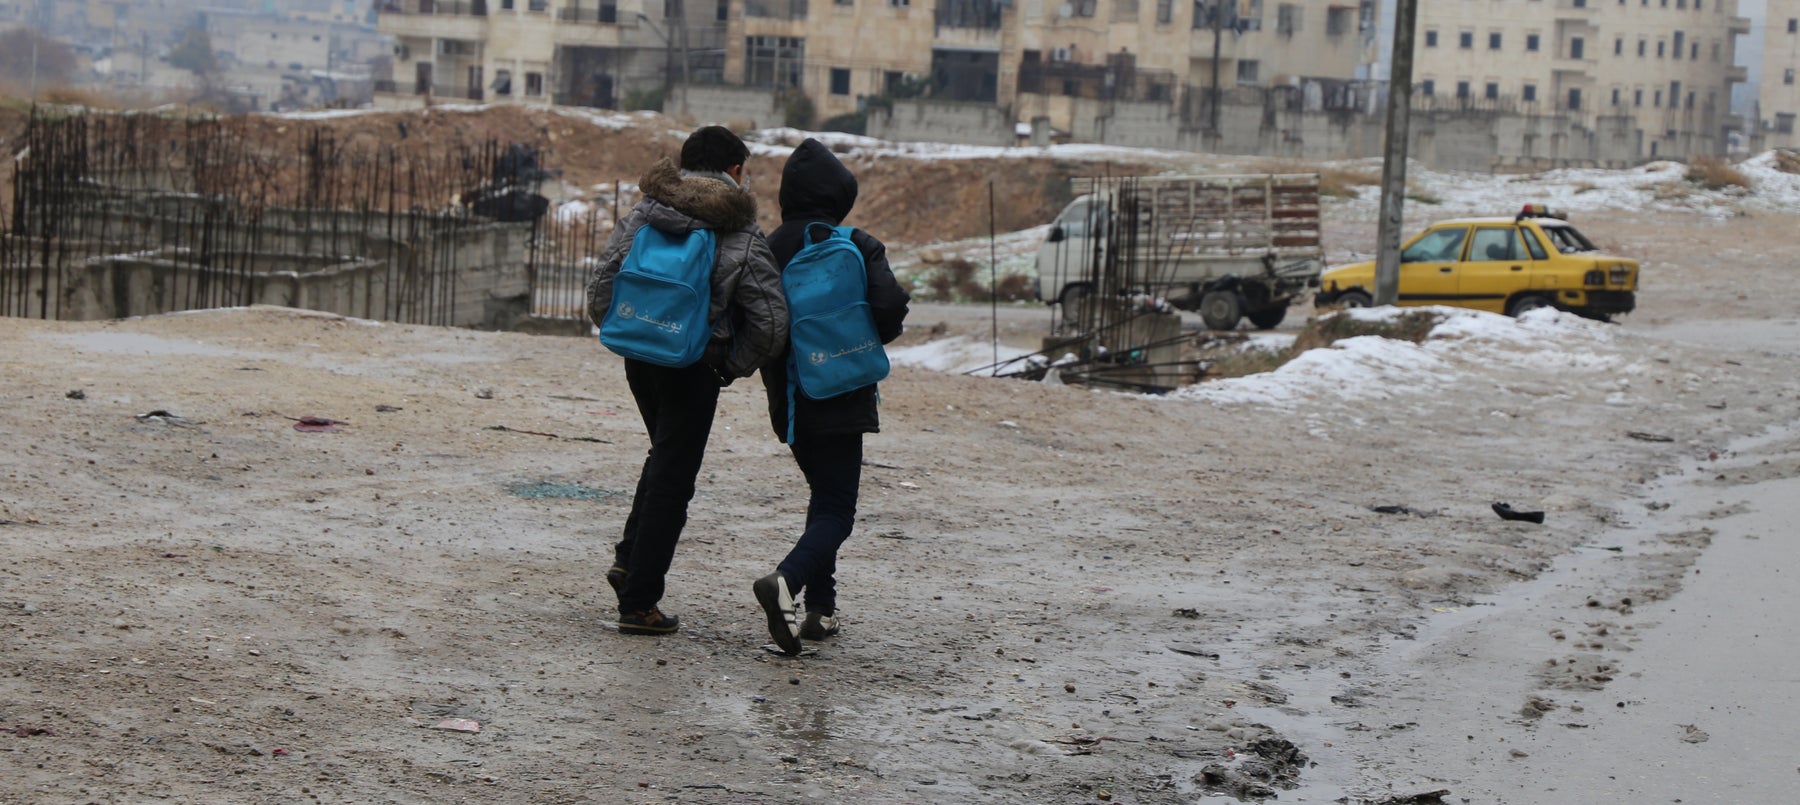 Children walking to school throw a street destroyed by conflict